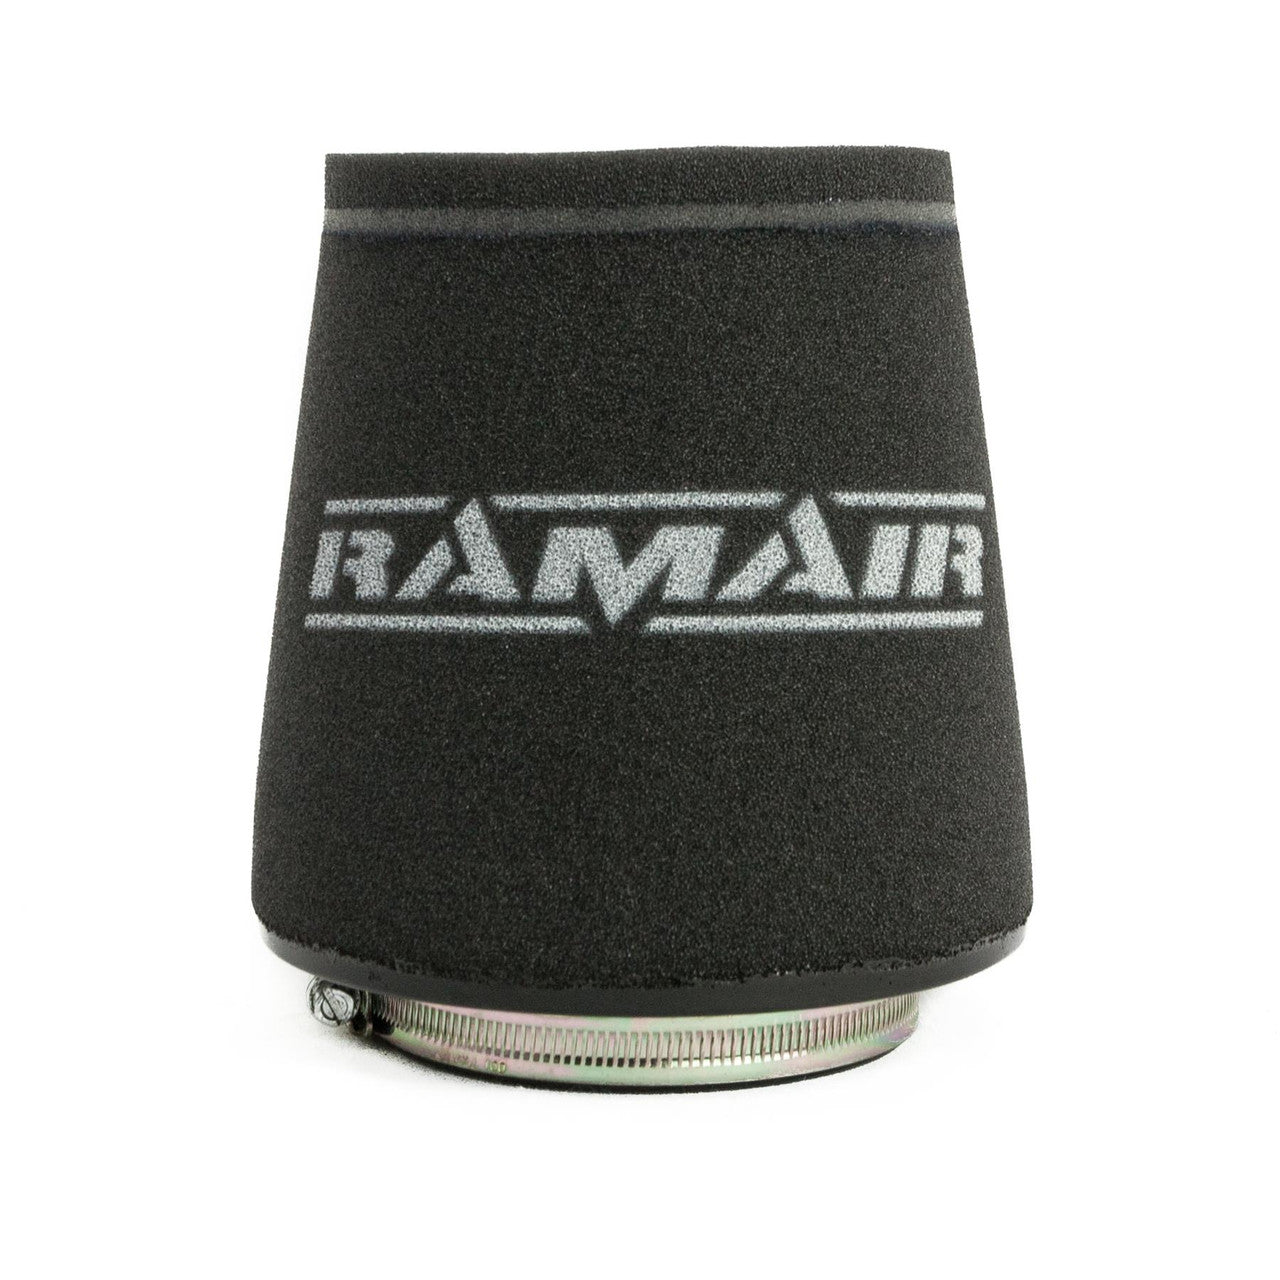 RamAir OE Replacement Foam Air Filter & WD Clamp - BMW 1 Series 116i (11-17) & 3 Series 316i (05-13)